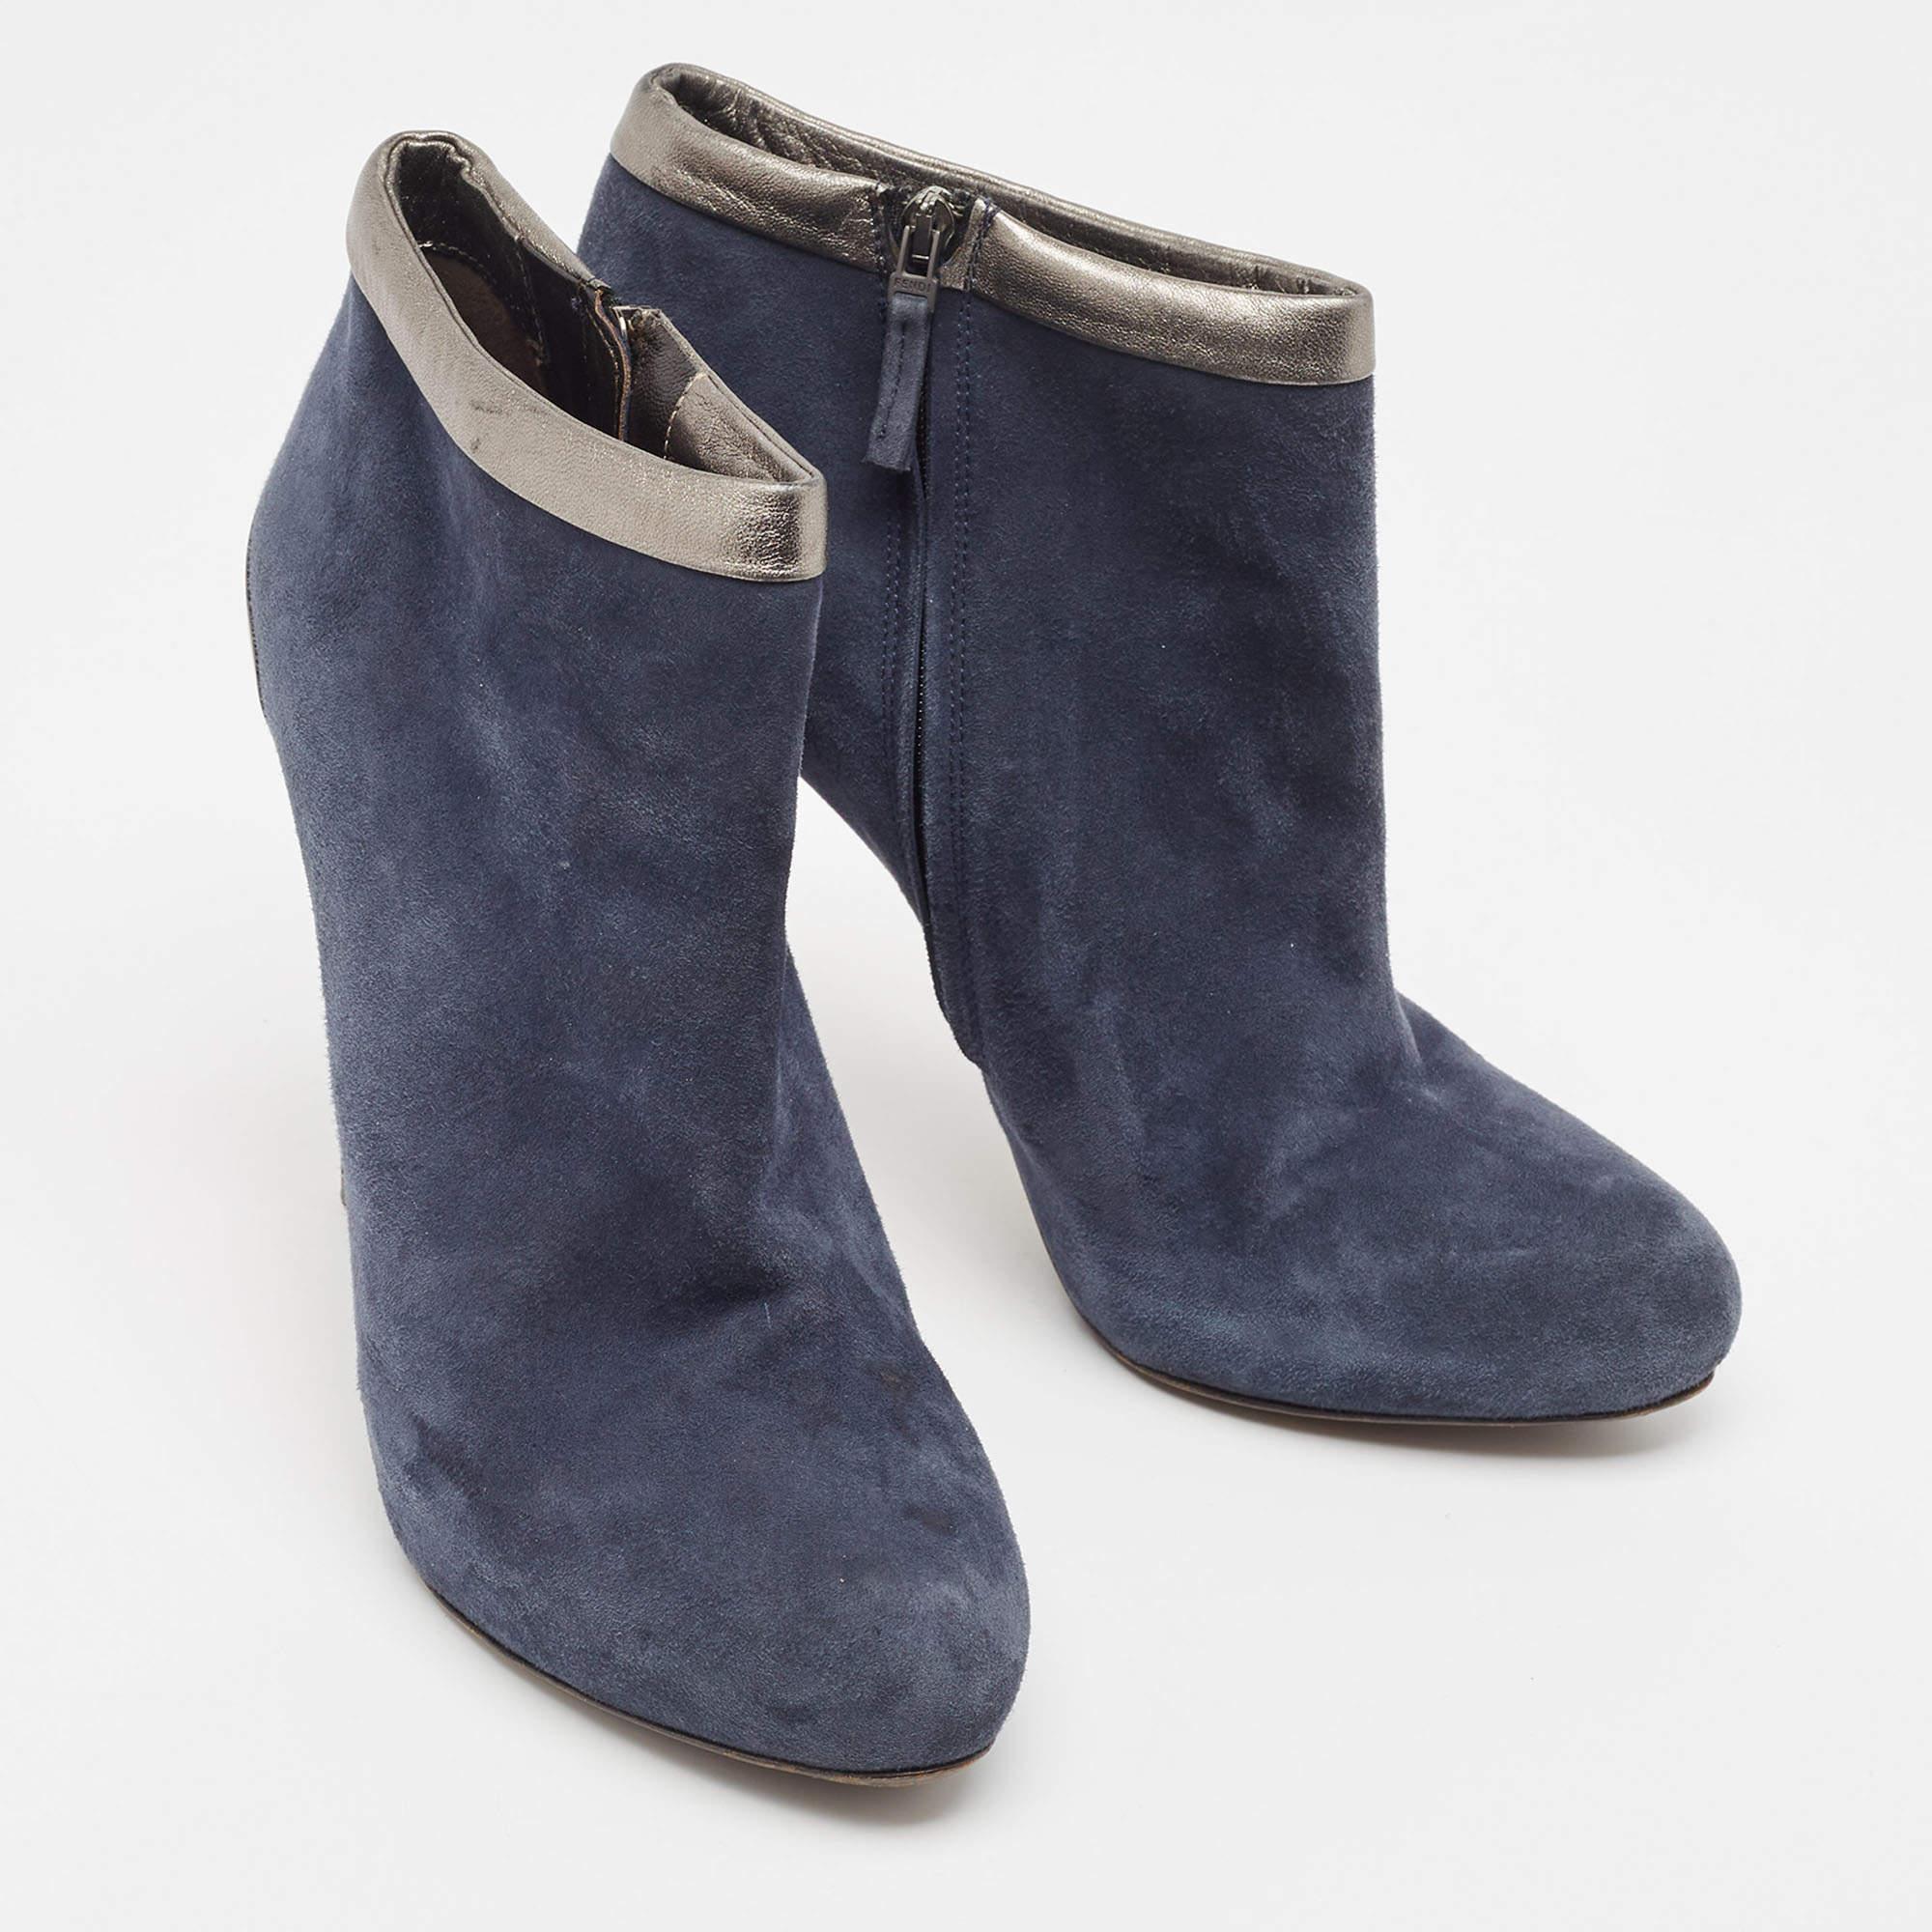 Fendi Navy Blue Suede Ankle Booties Size 39.5 For Sale 3